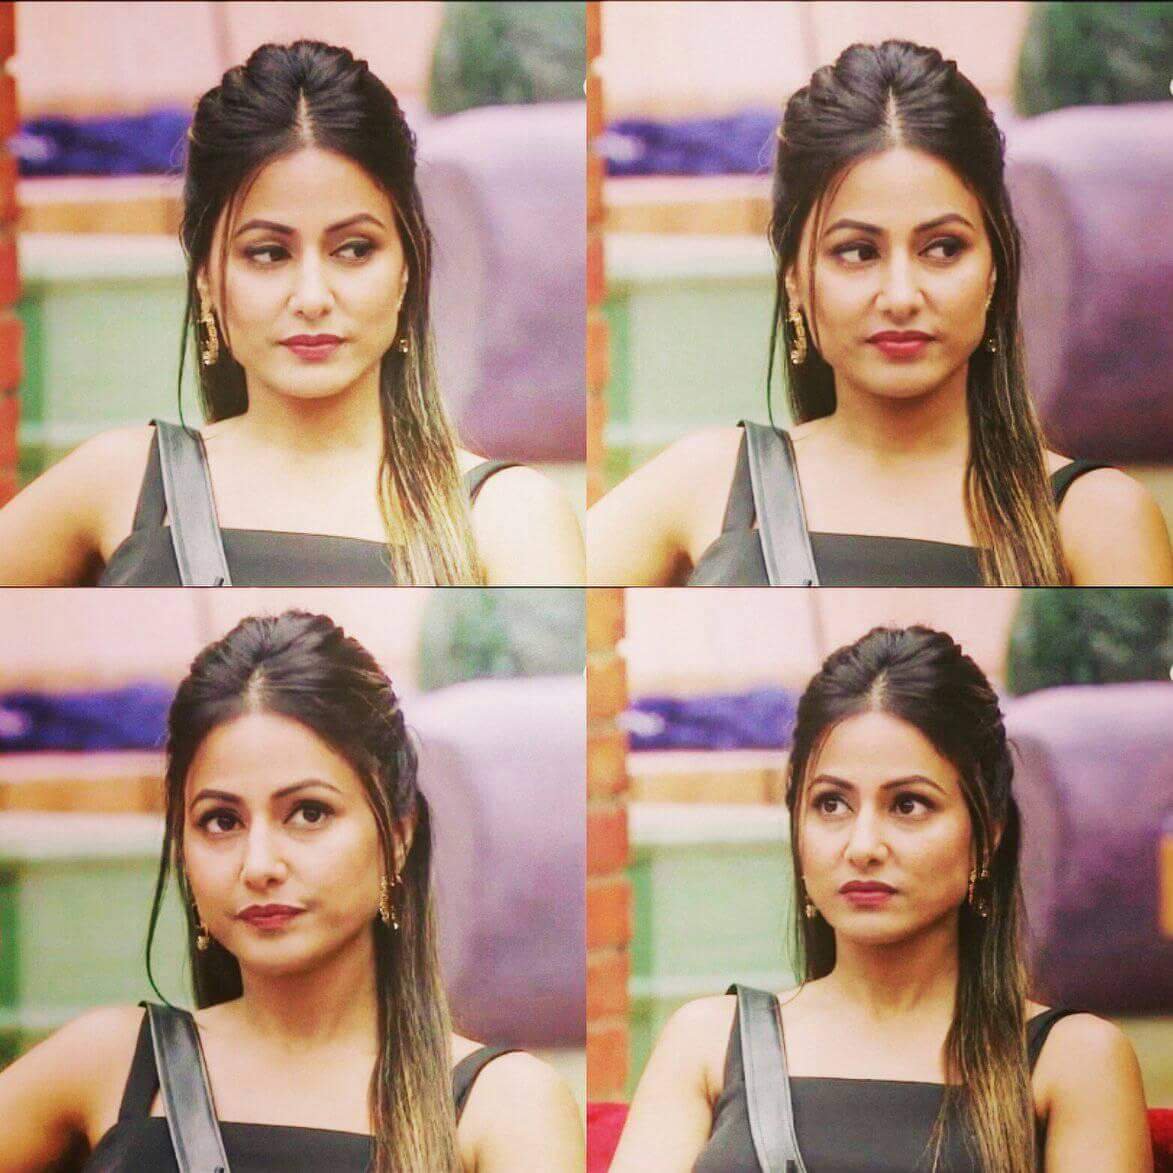 Hina's New Beginnings 💓🙏🏻 and new journey 💕 but your hardwork, dedication and honesty remains same 💕 may with rays of sun 🌞 bring more sunshine and blessings for u @eyehinakhan all the best di for this new moment and beginning #HinaKhan #MovieShoot #VikramBhatt movie 🙏🏻🤞